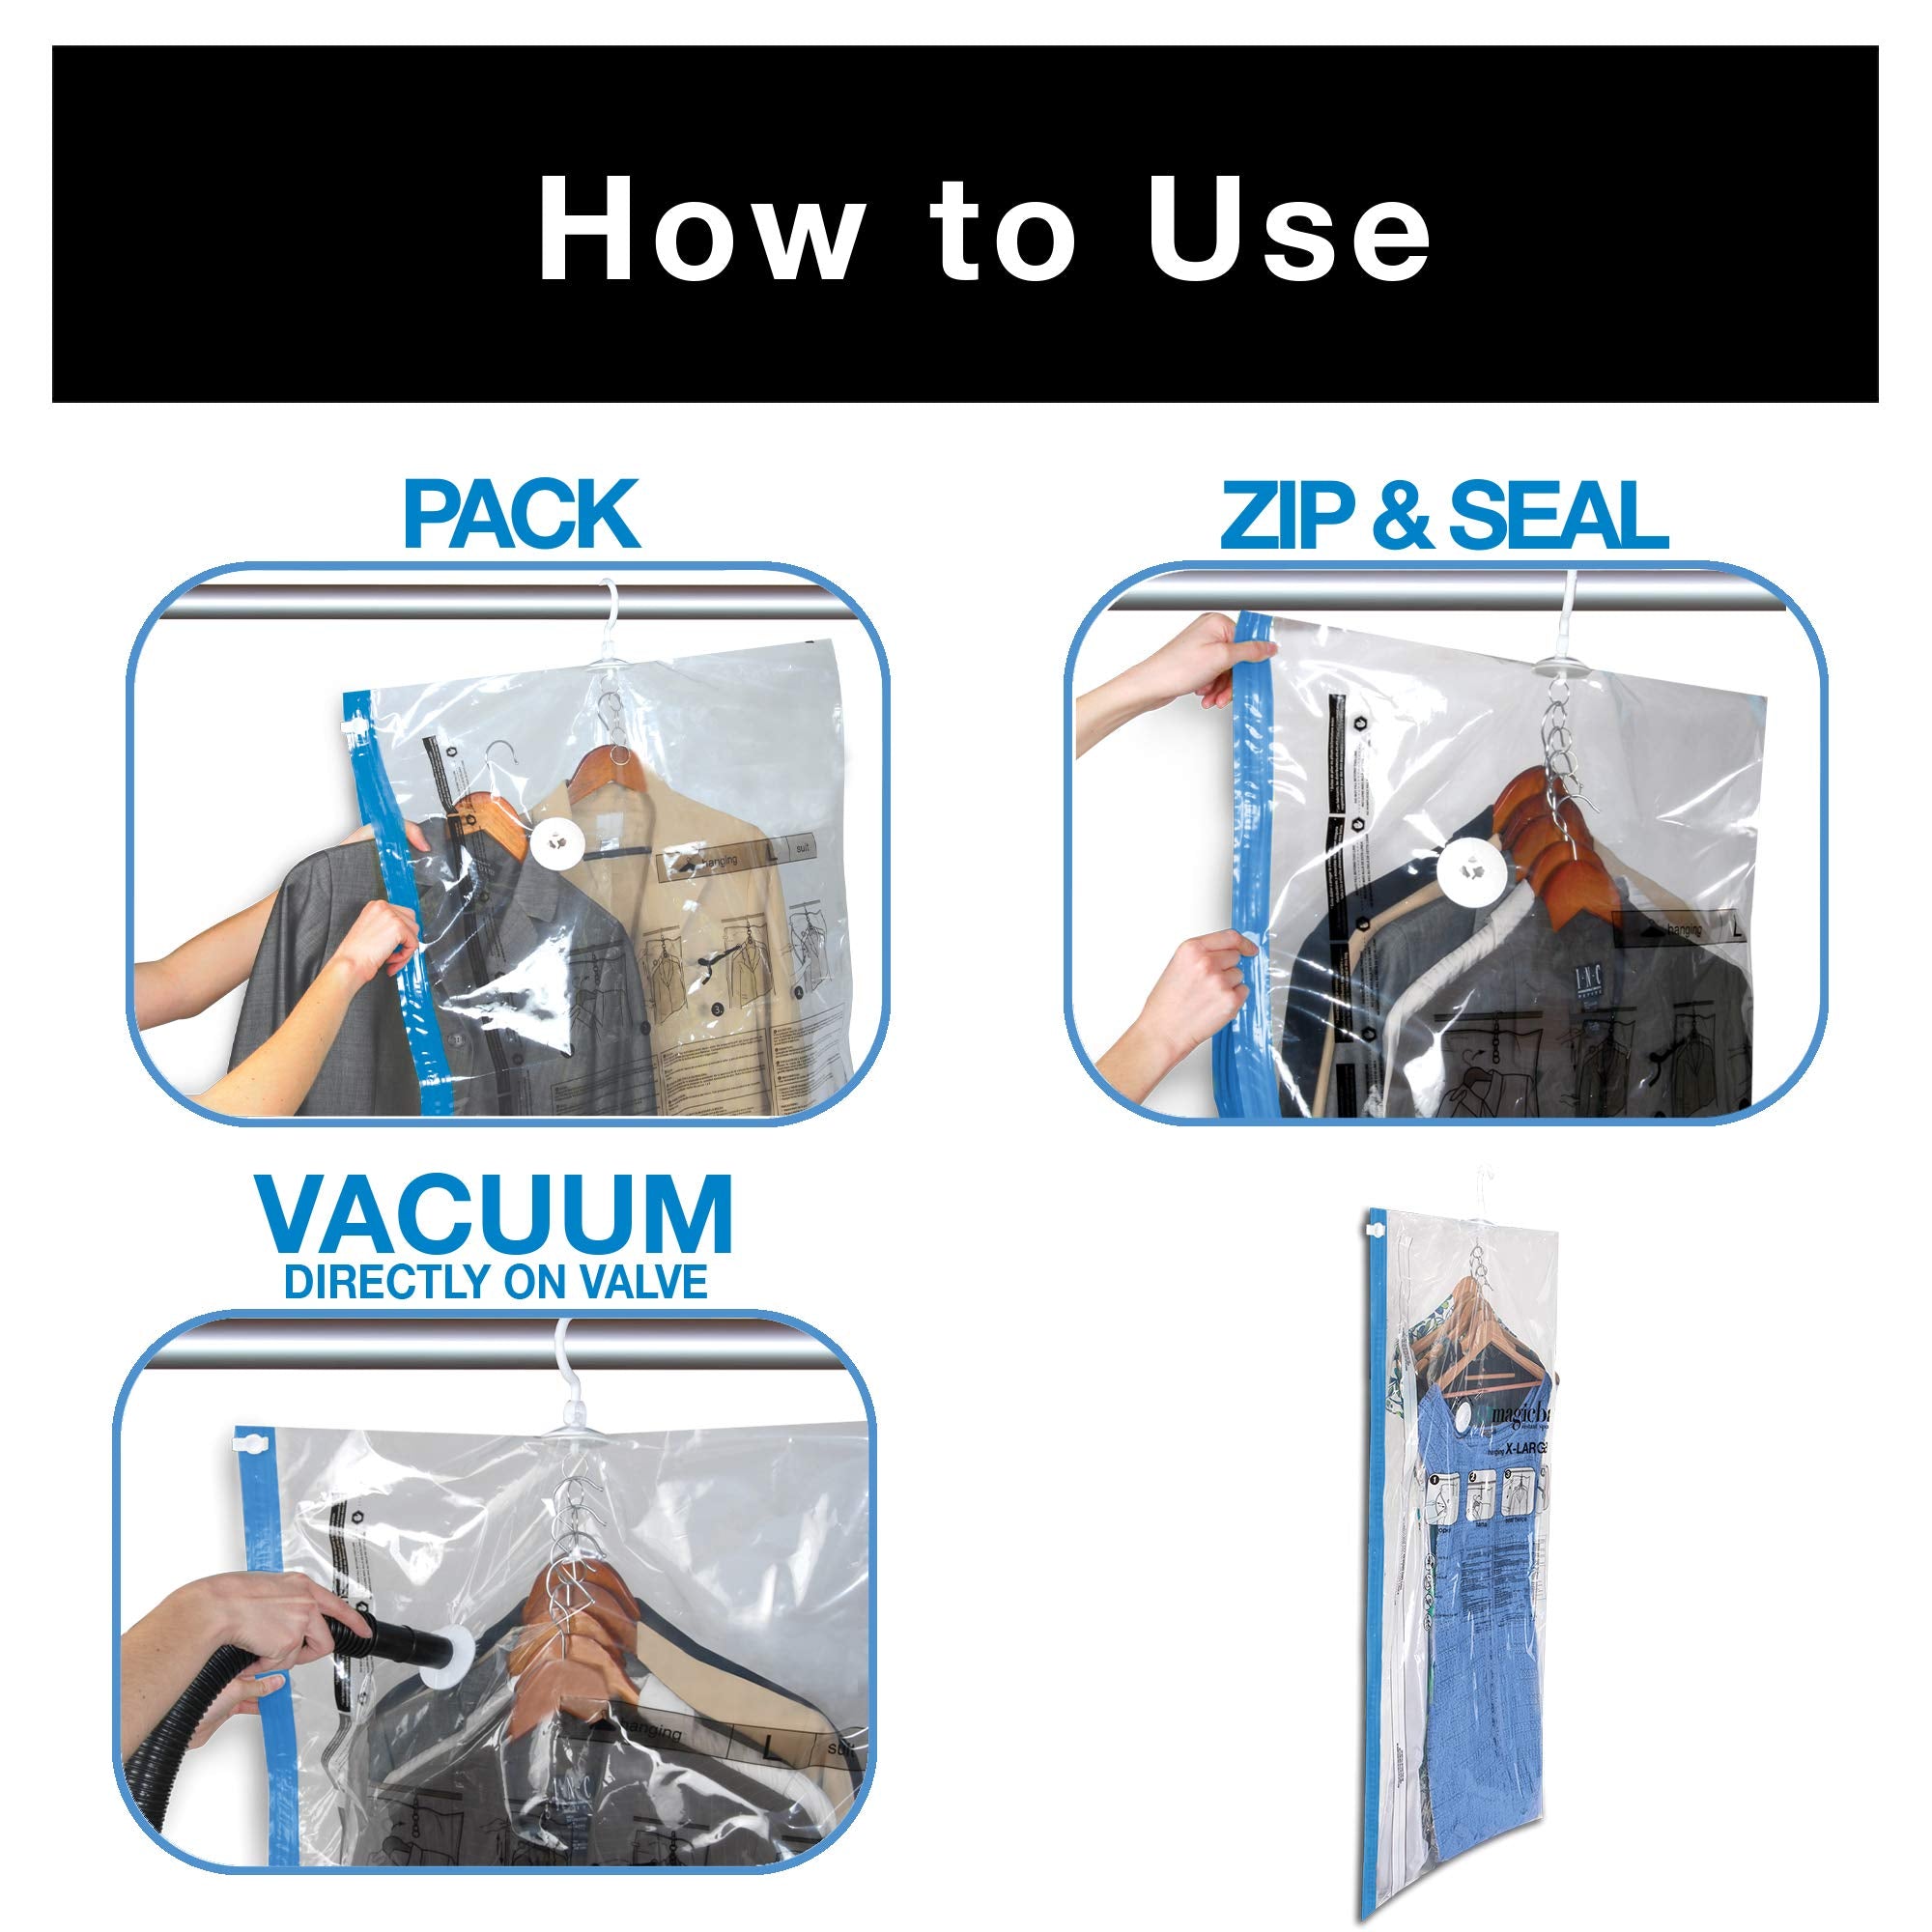 MagicBag Smart Design Instant Space Saver Storage - Flat Extra Large -  Airtight Double Zipper - Vacuum Seal - Clothing, Pillows - Home Organization